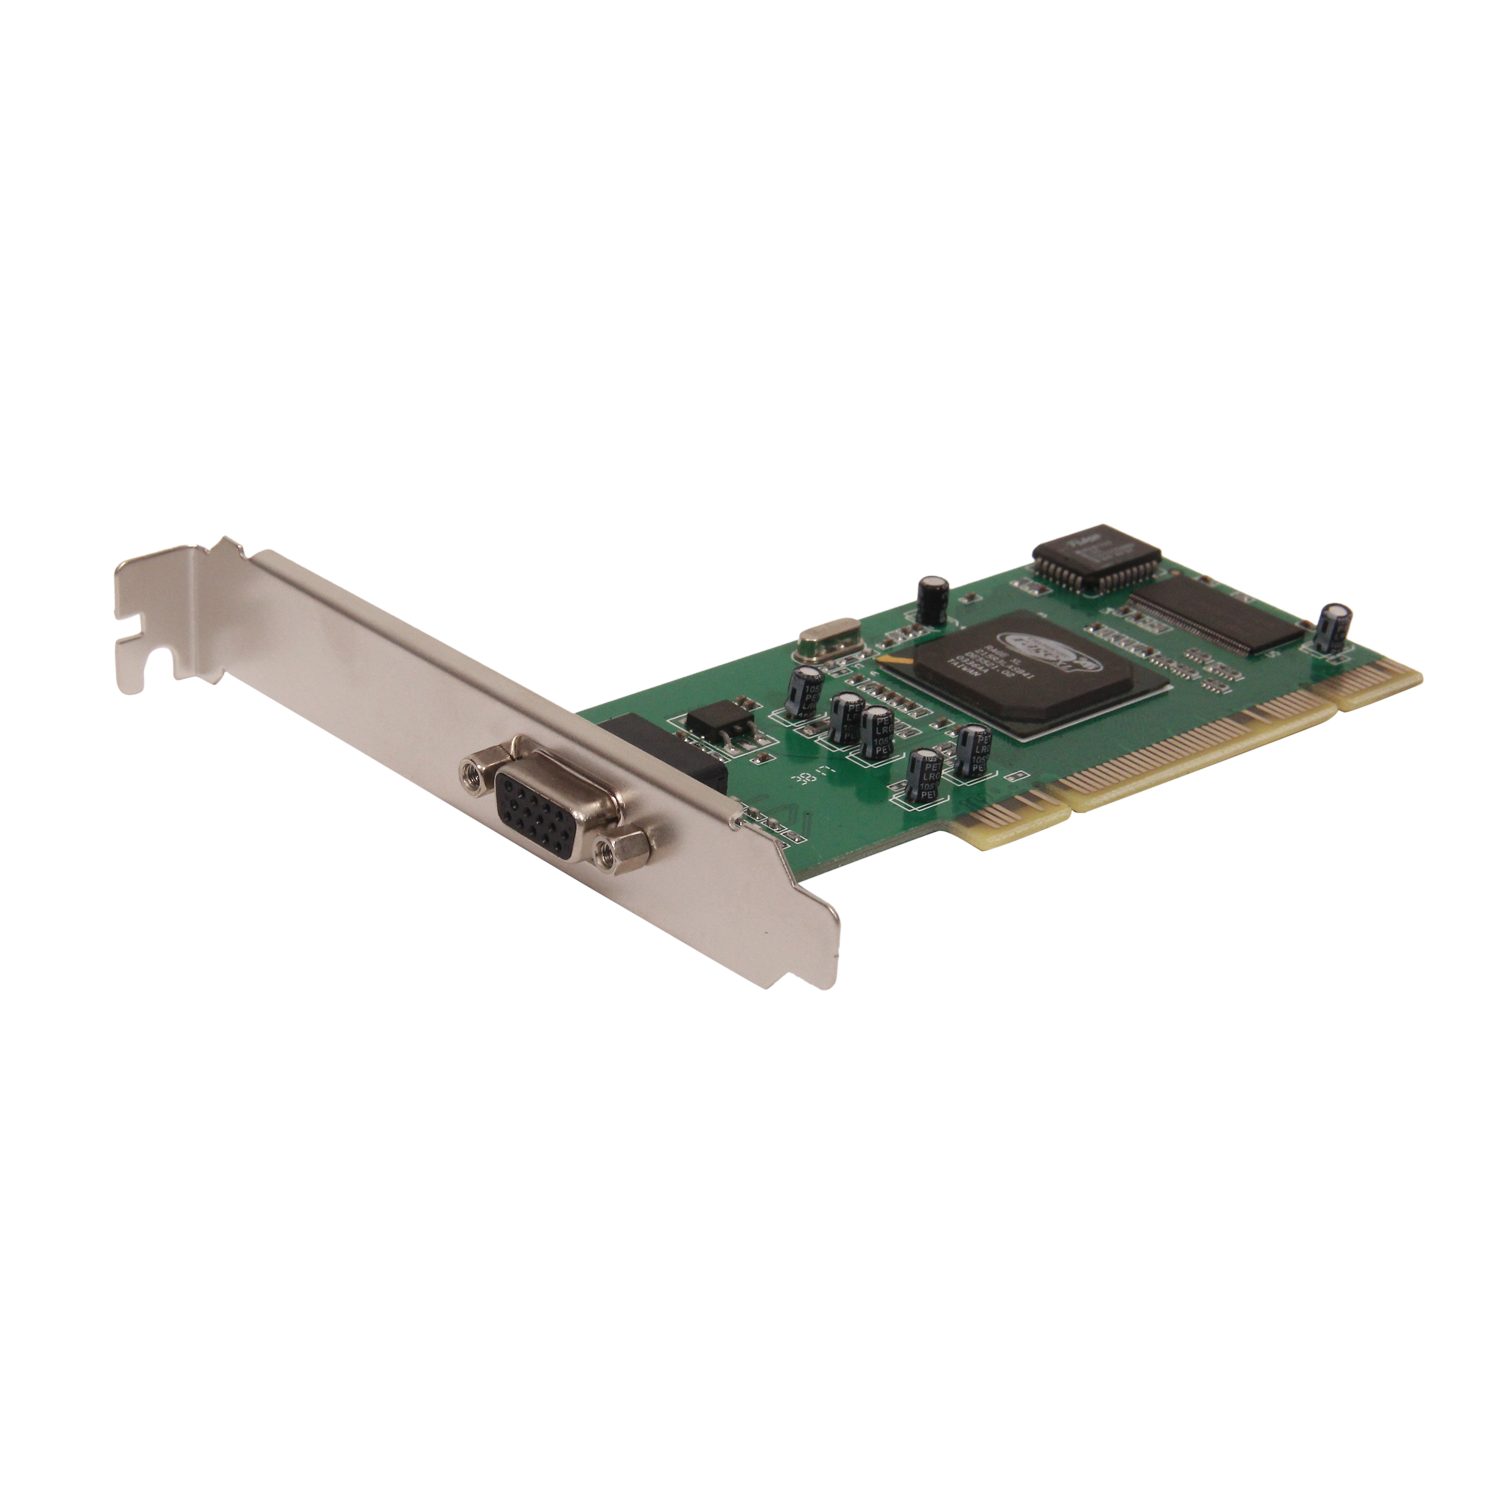 VGA Card at Best Price - Buy Best PCI VGA Graphic Card 8MB Online